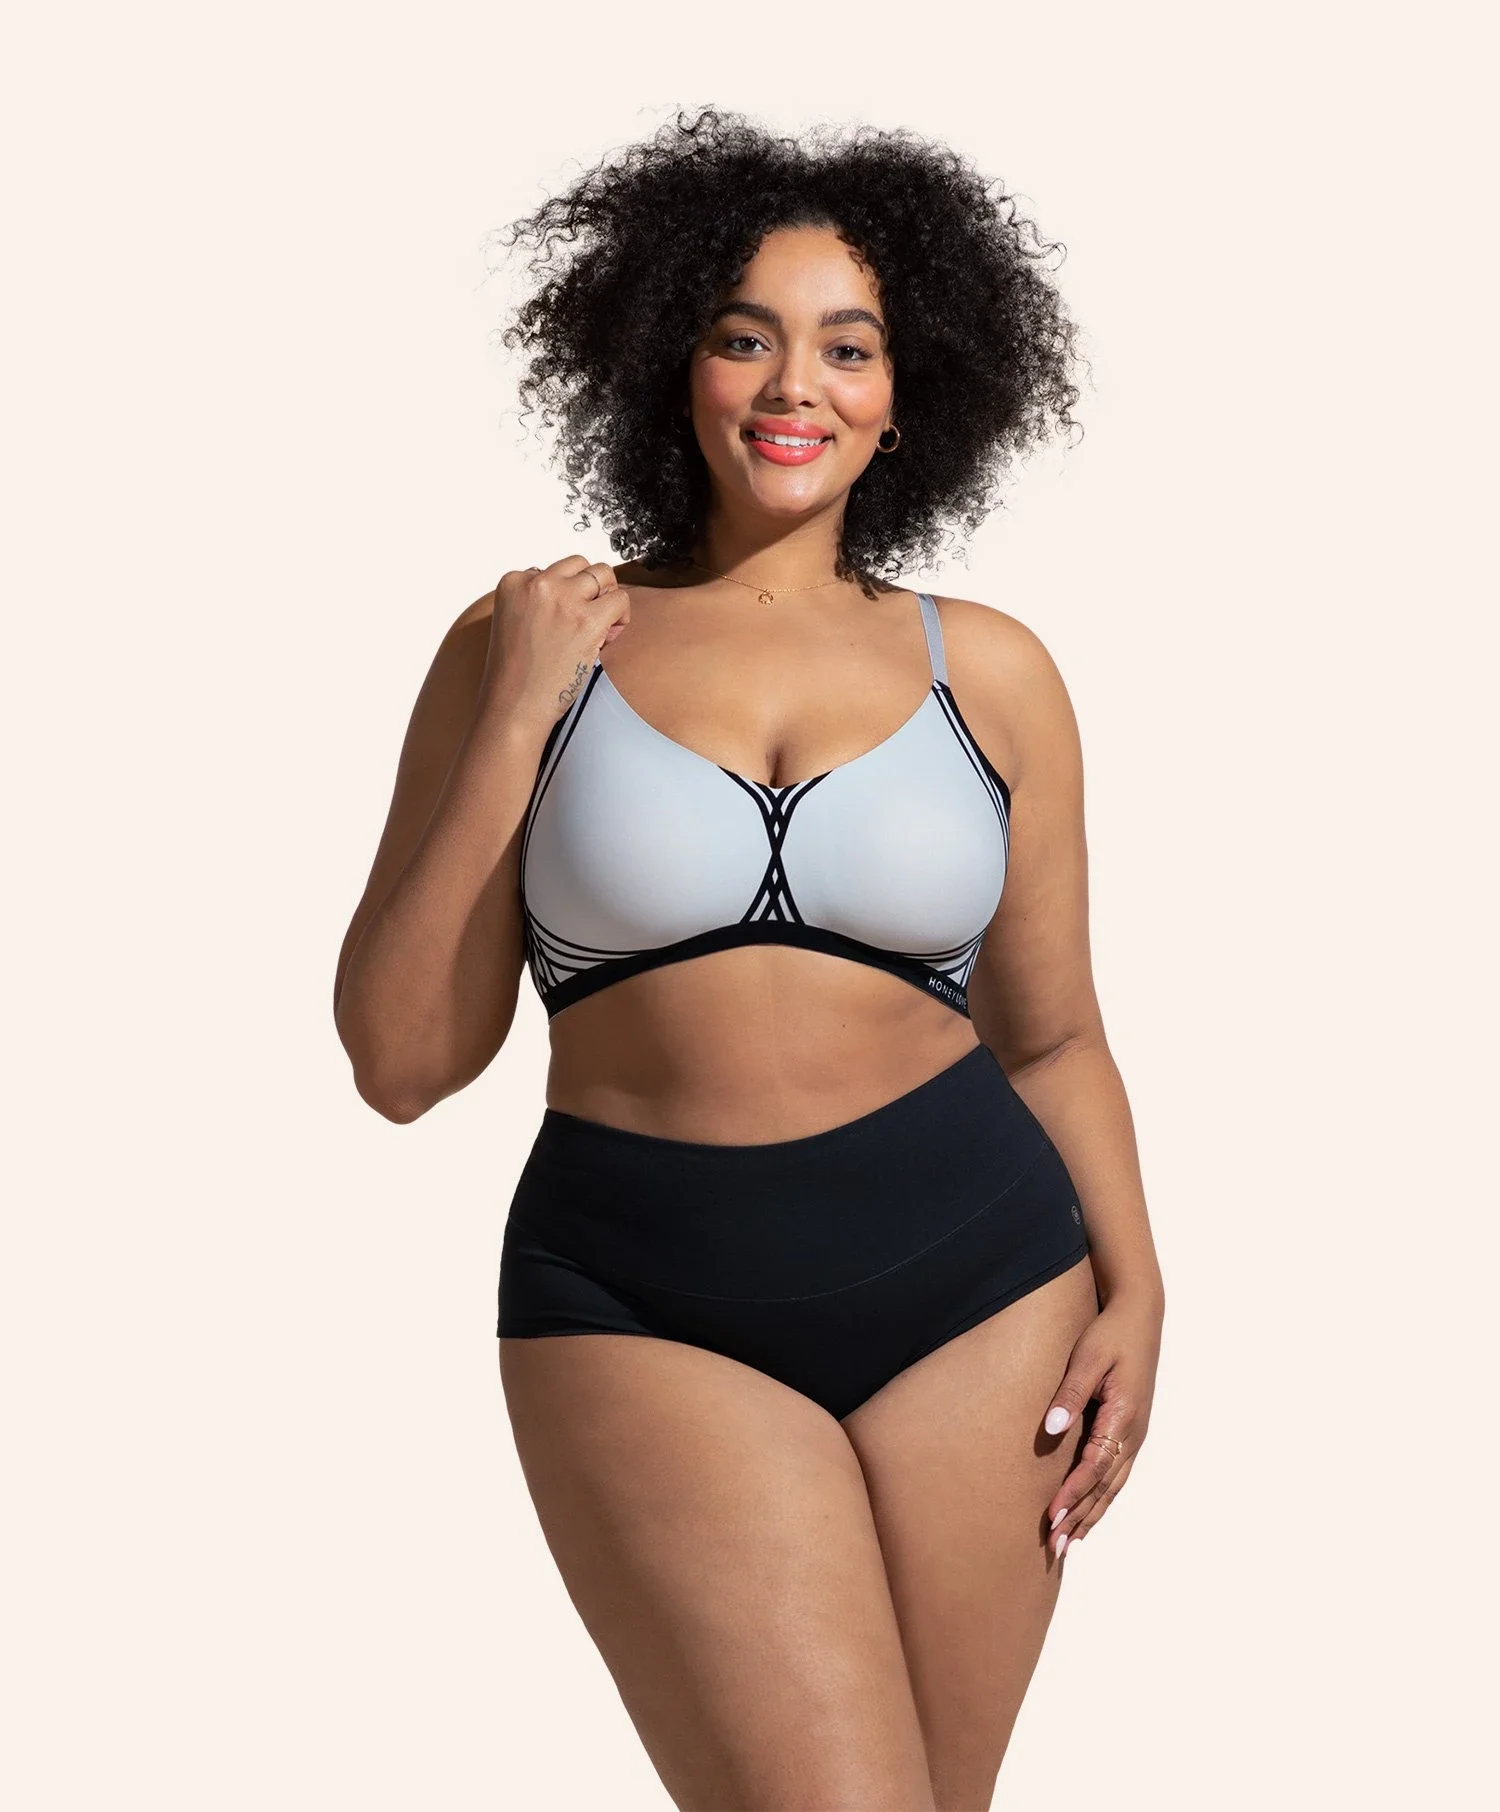 Sculptwear by HoneyLove: What customers are saying about the Silhouette Bra  ✨